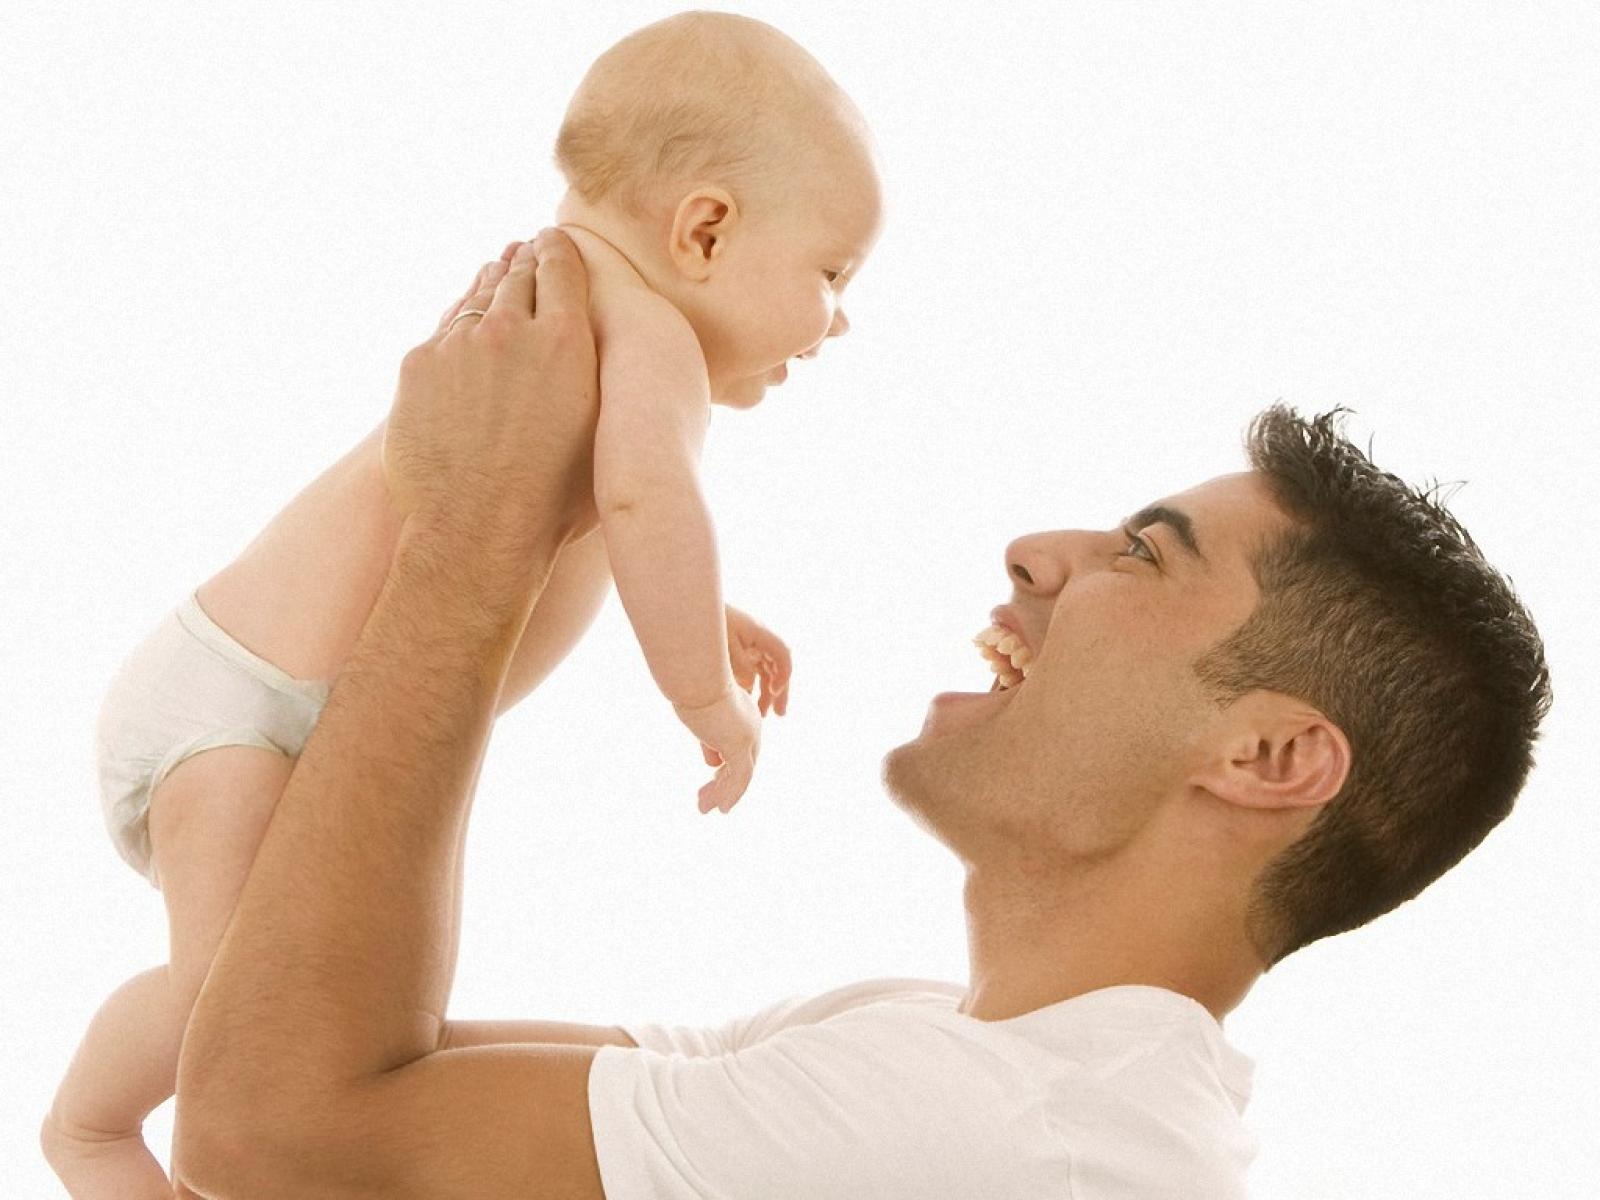 father_and_son_69027-1600×1200